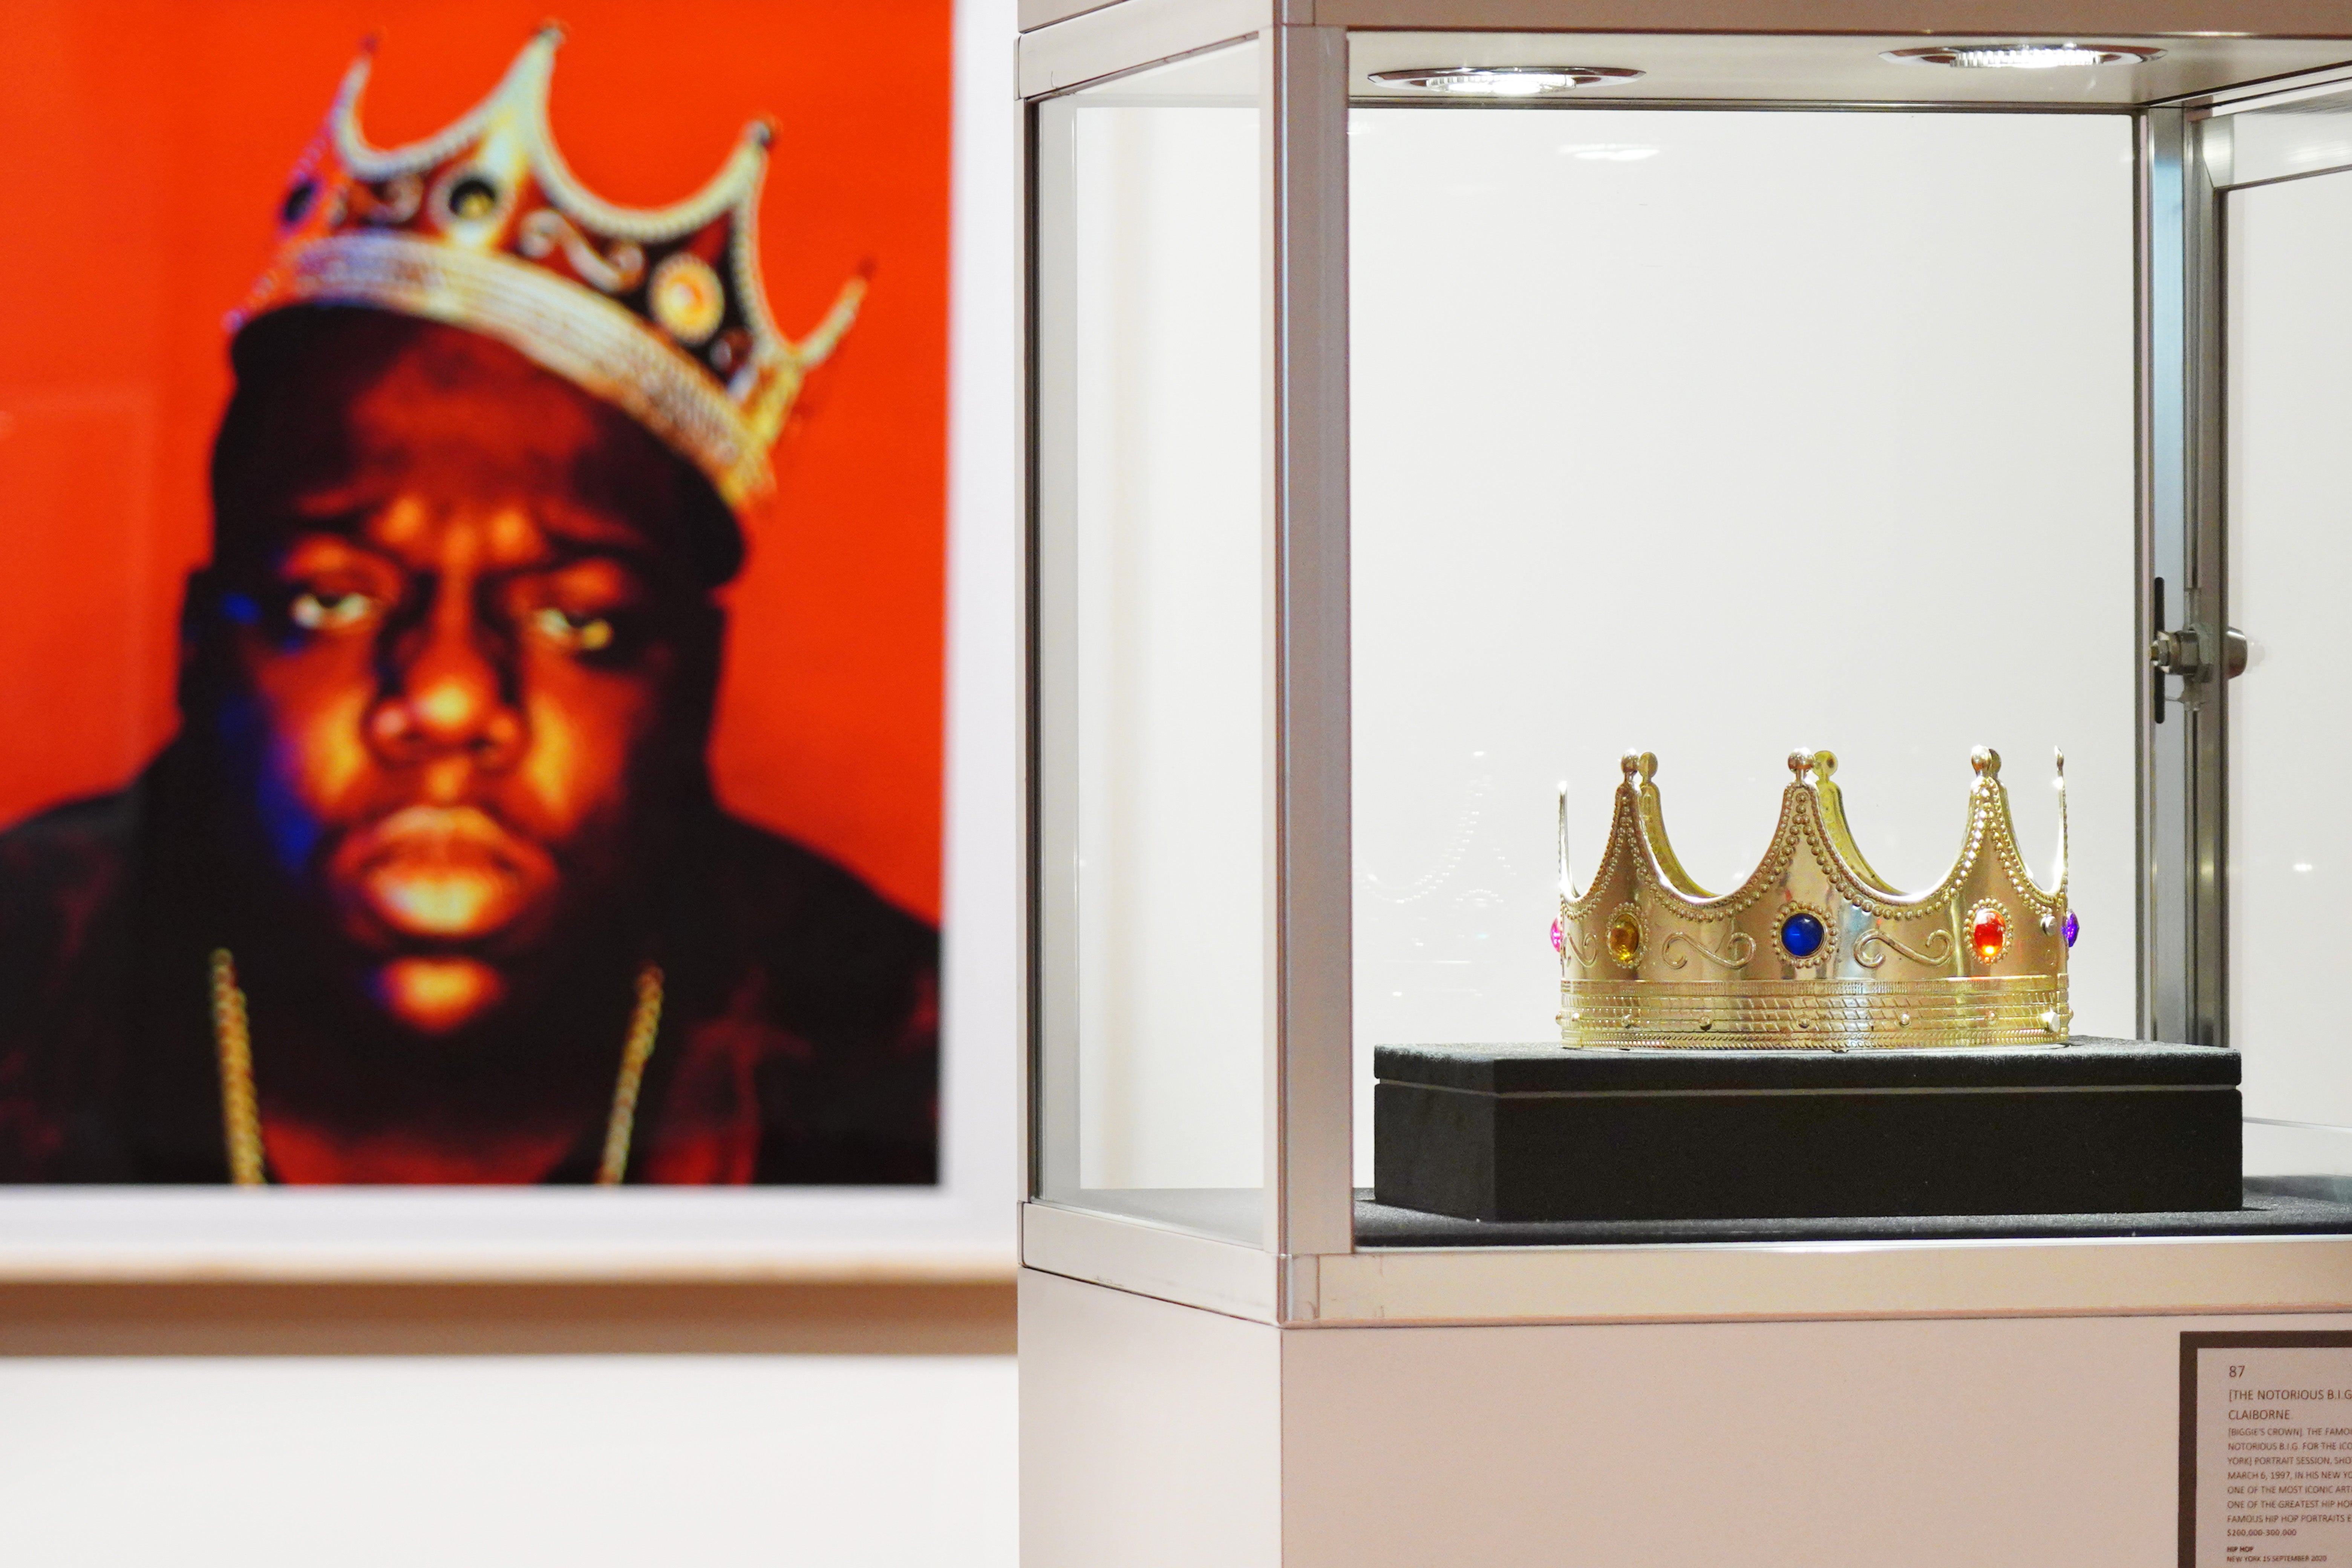 The crown worn by The Notorious BIG just before his death